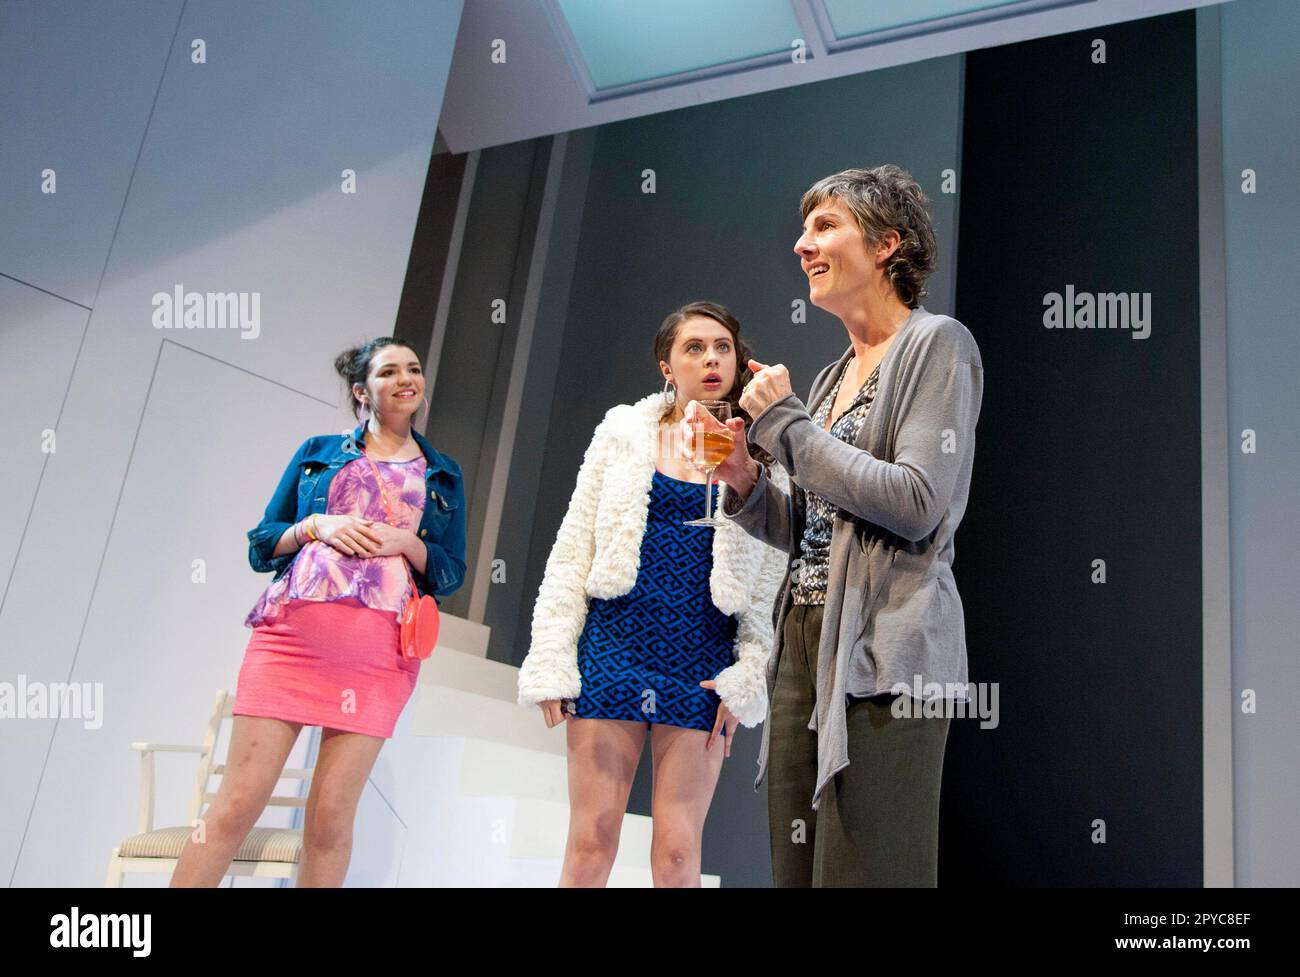 l-r: Seline Hizli (Lyndsey), Bel Powley (Tilly), Tamsin Greig (Hilary) in JUMPY by April de Angelis at the Jerwood Theatre Downstairs, Royal Court Theatre, London SW1  19/10/2011  design: Lizzie Clachan  lighting: Peter Mumford  director: Nina Raine Stock Photo